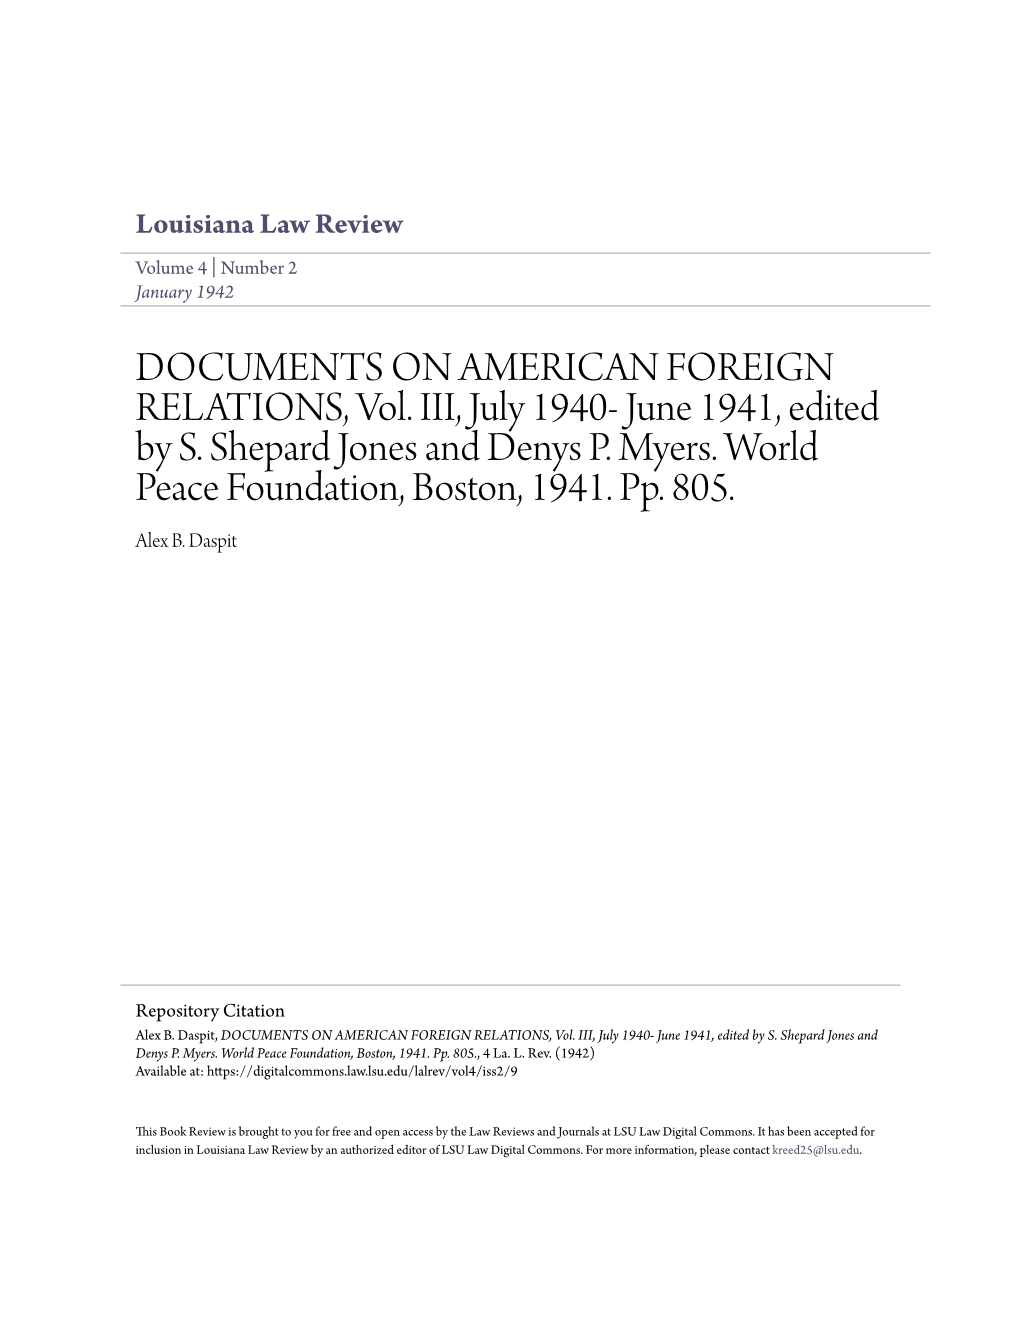 DOCUMENTS on AMERICAN FOREIGN RELATIONS, Vol. III, July 1940- June 1941, Edited by S